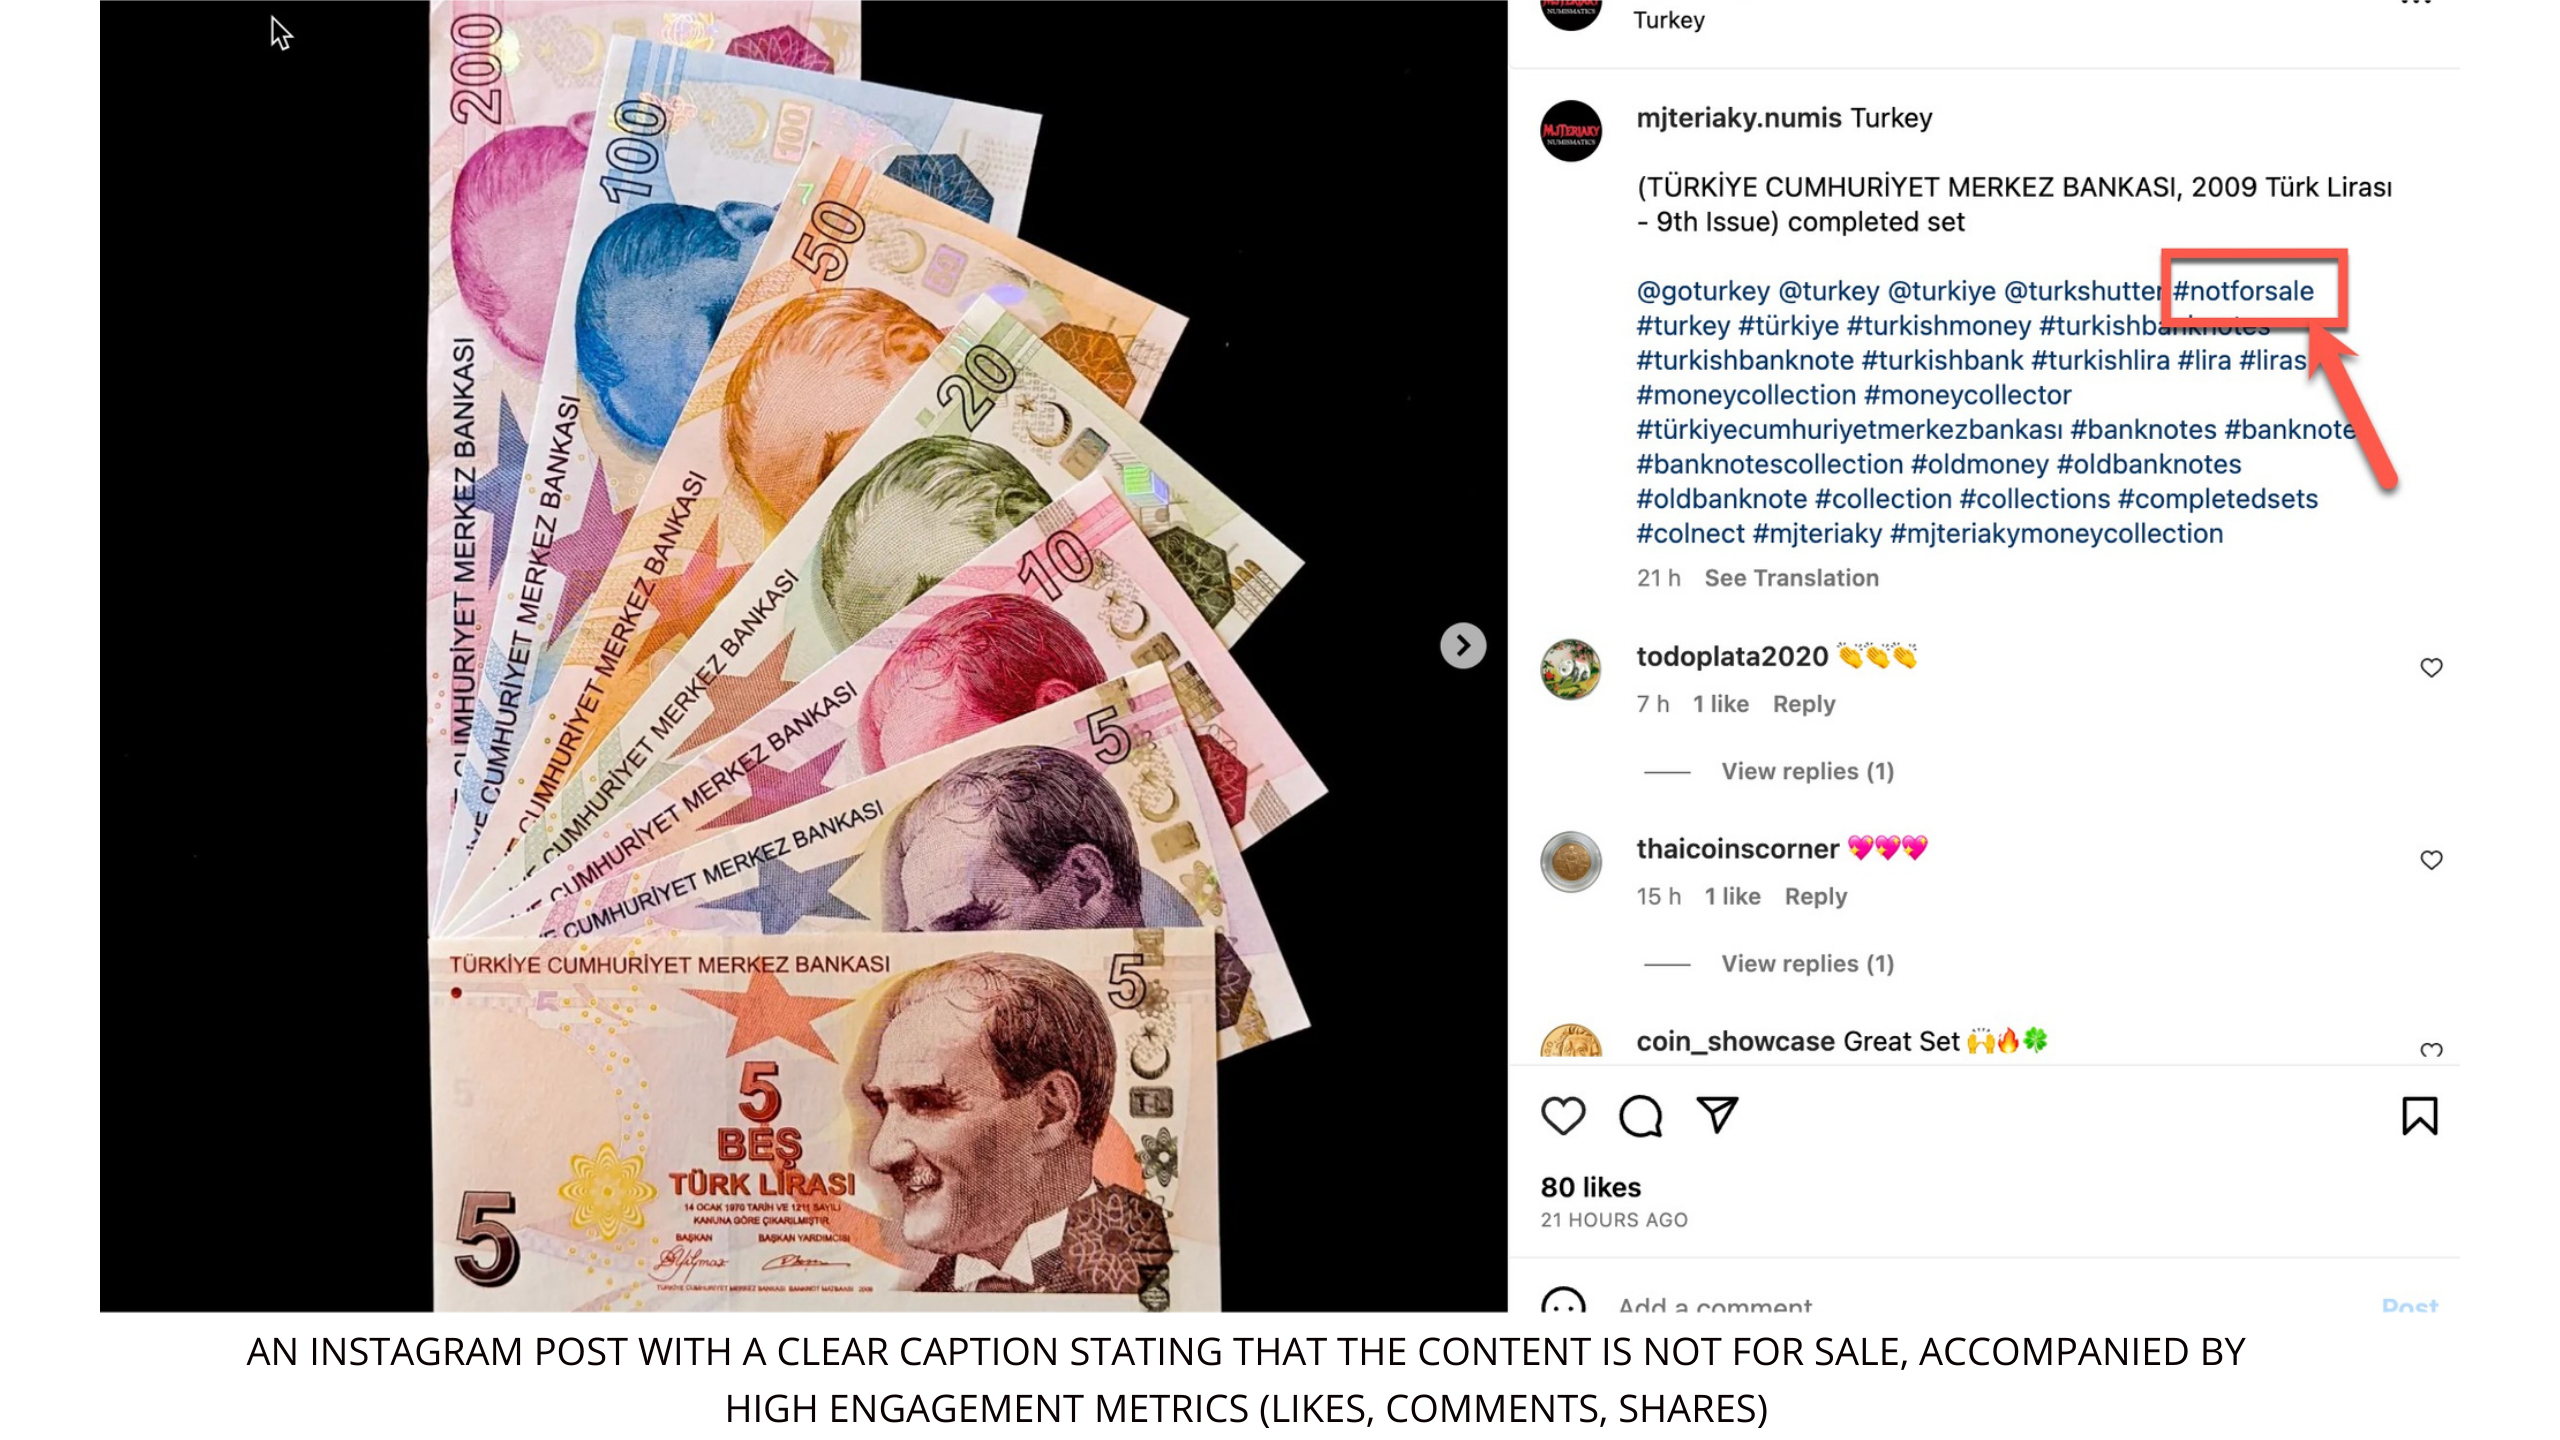 An Instagram post with a clear caption stating that the content is not for sale, accompanied by high engagement metrics (likes, comments, shares).